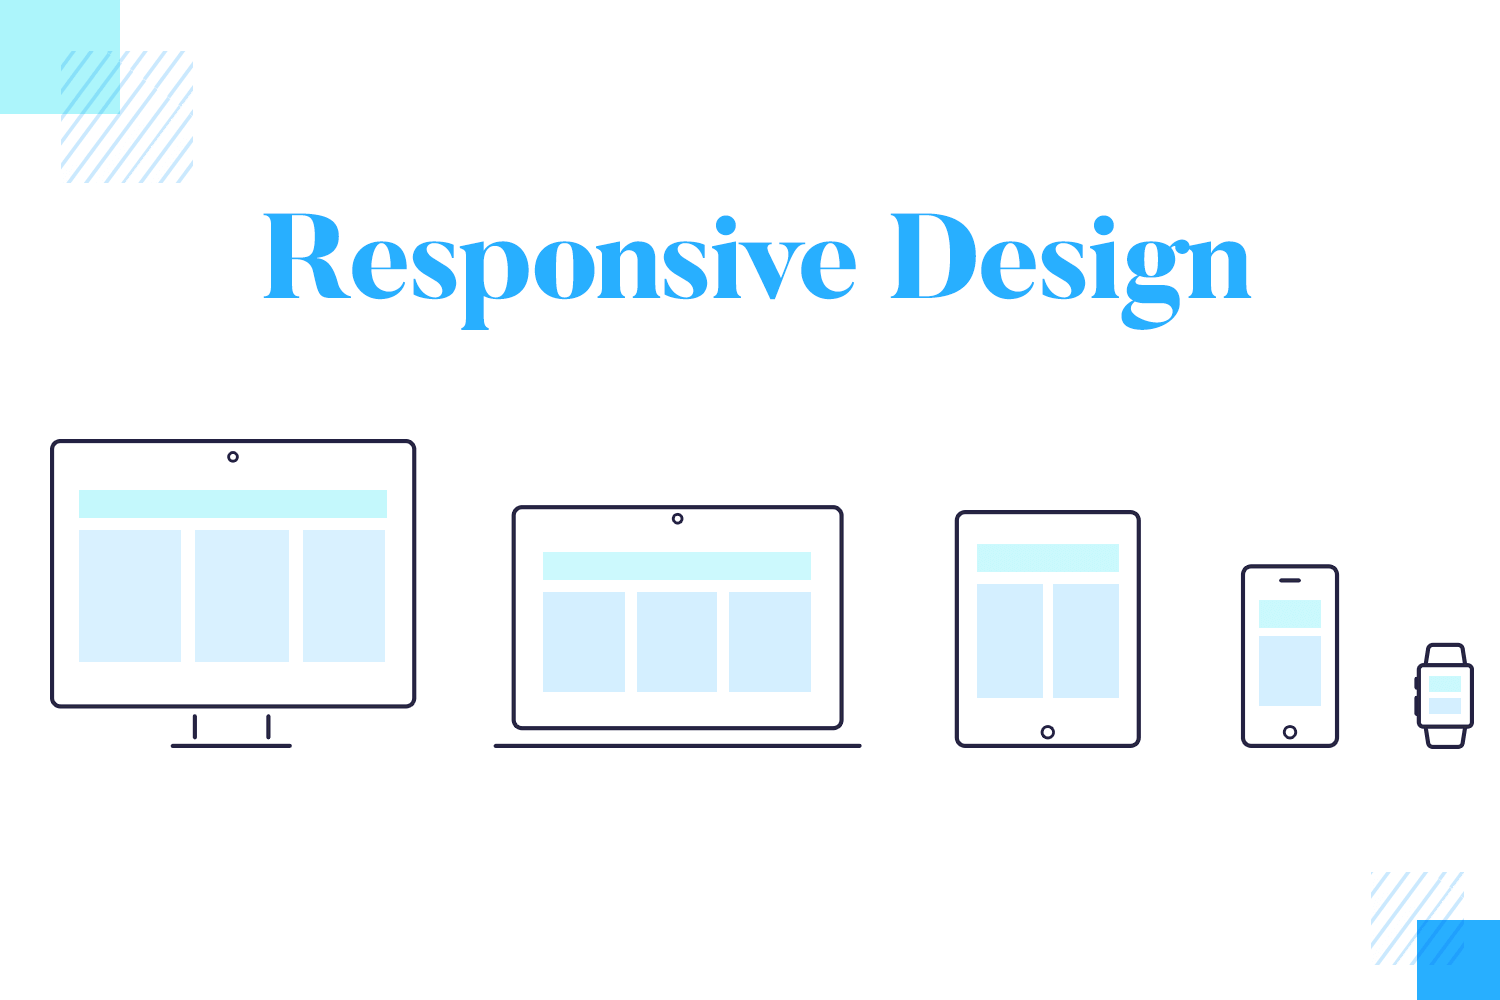 Prototypes should be responsive across a range of devices